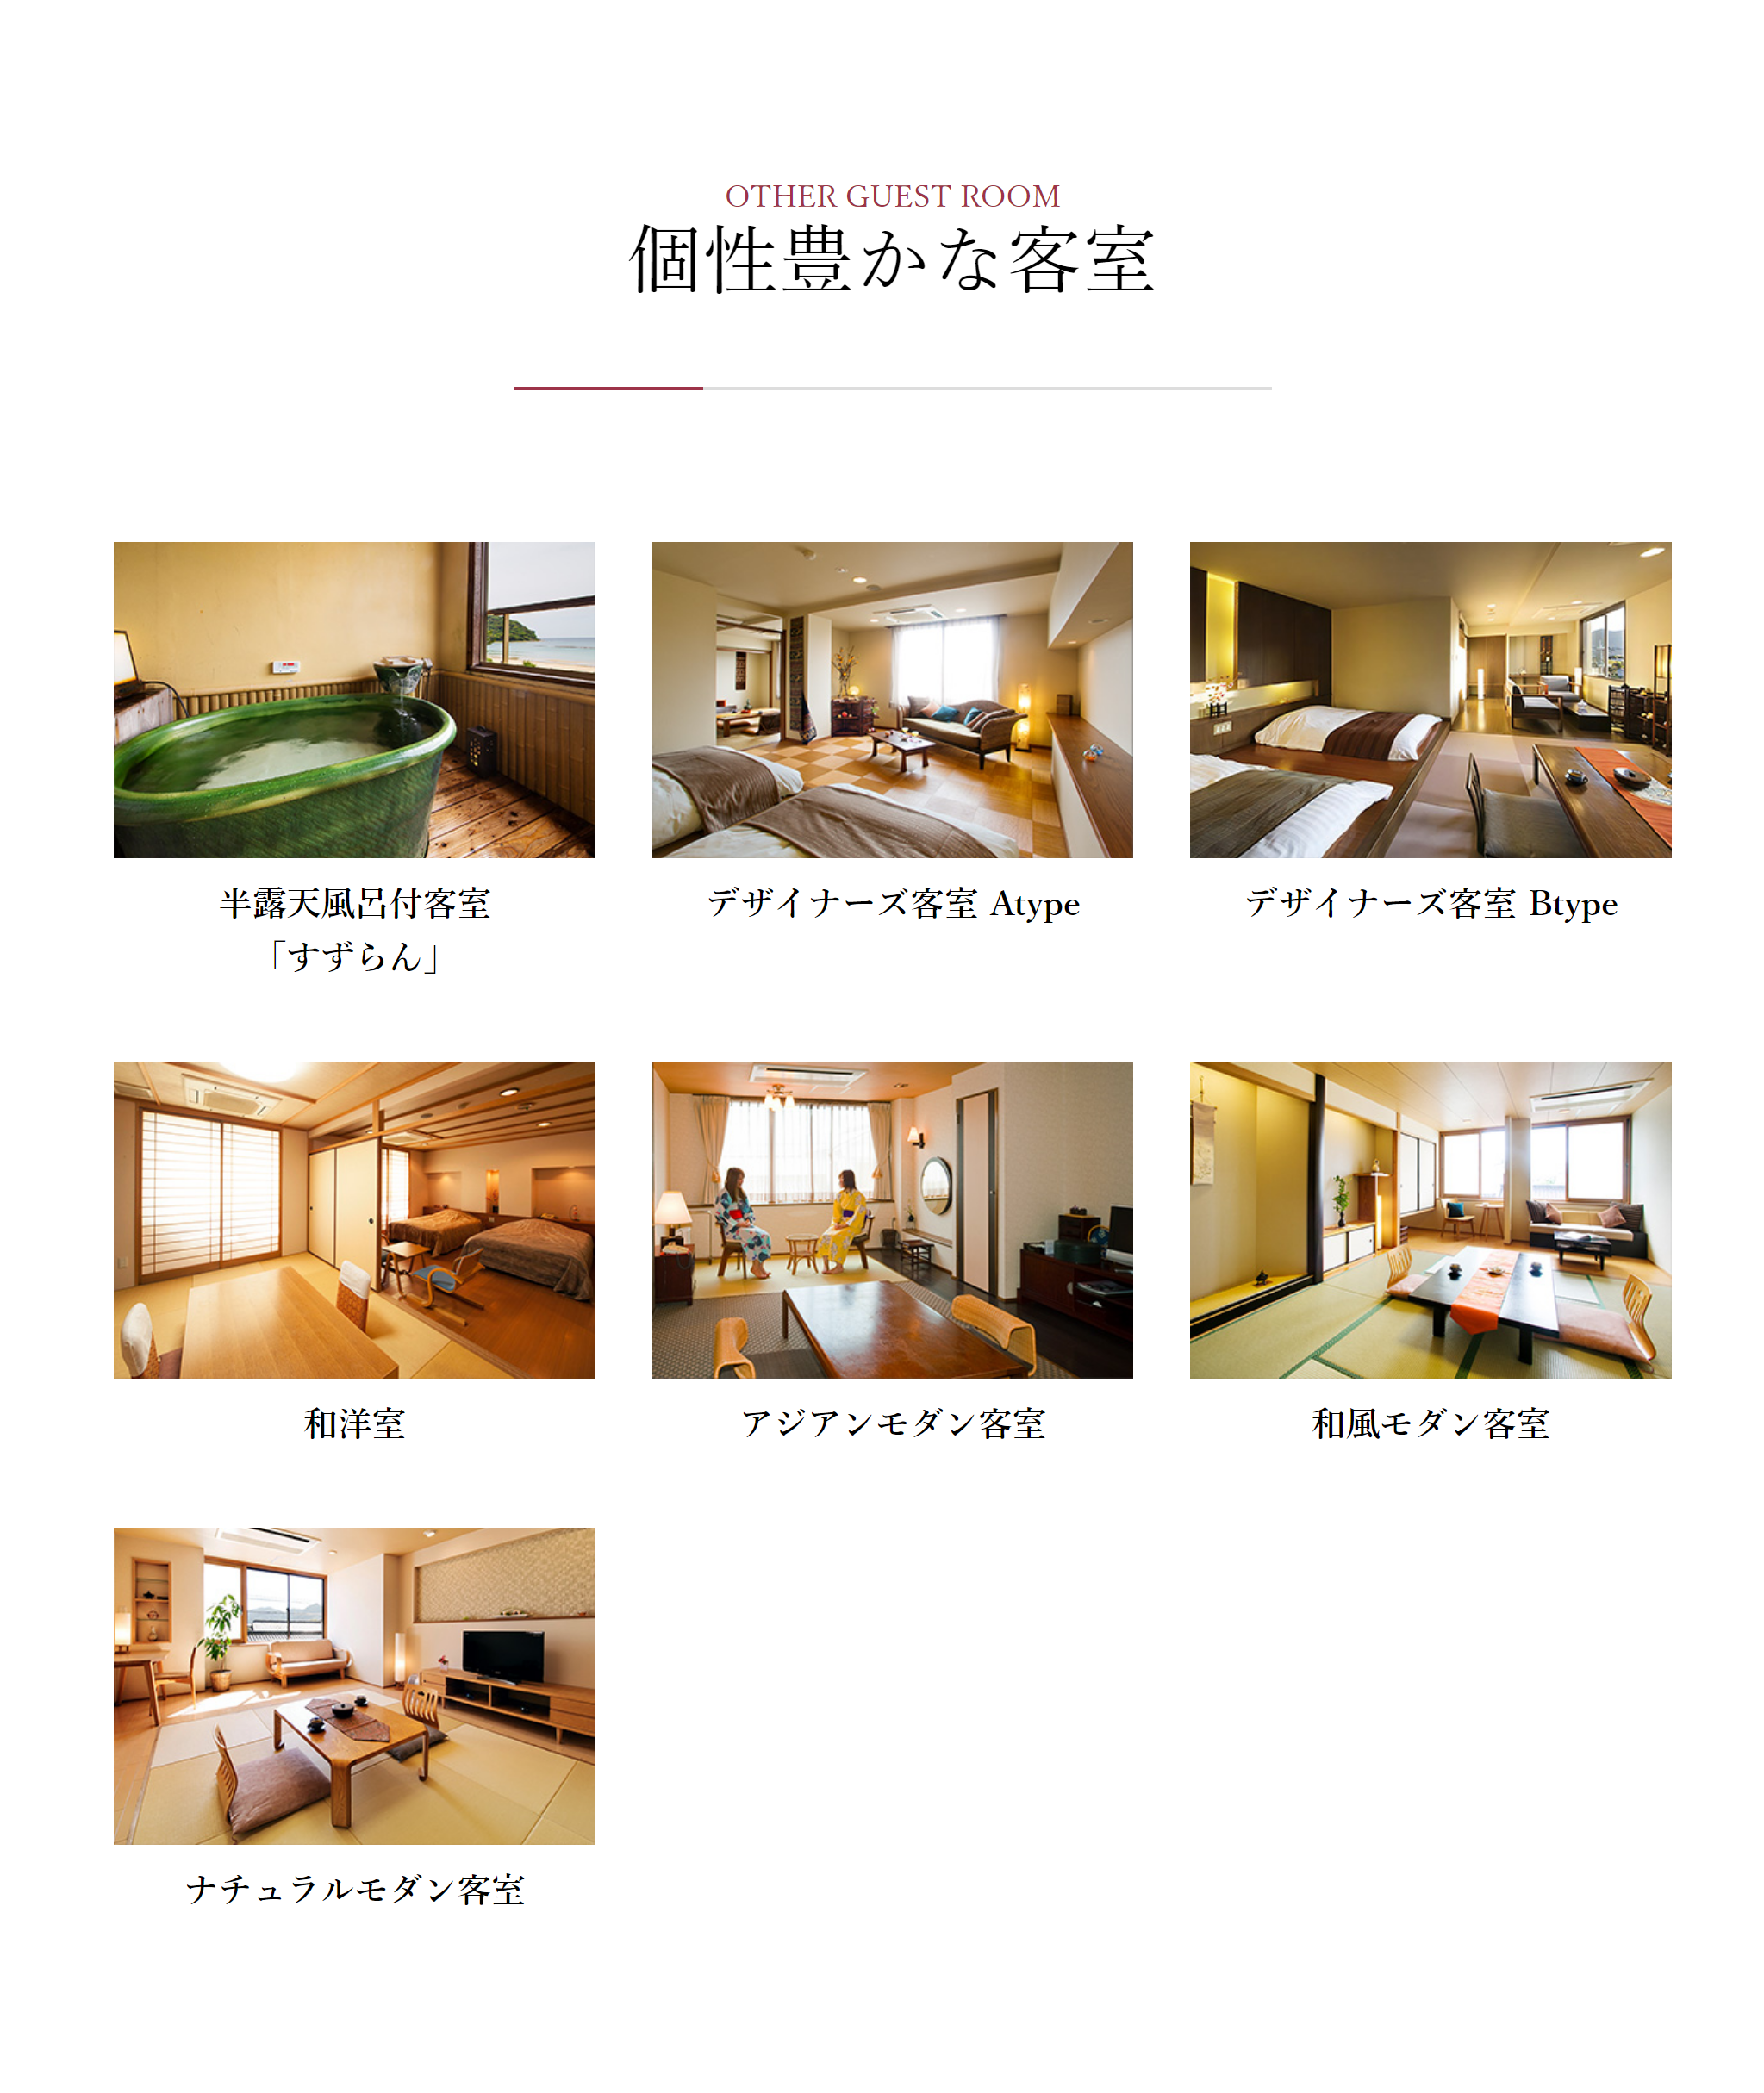 OTHER GUEST ROOM 個性豊かな客室